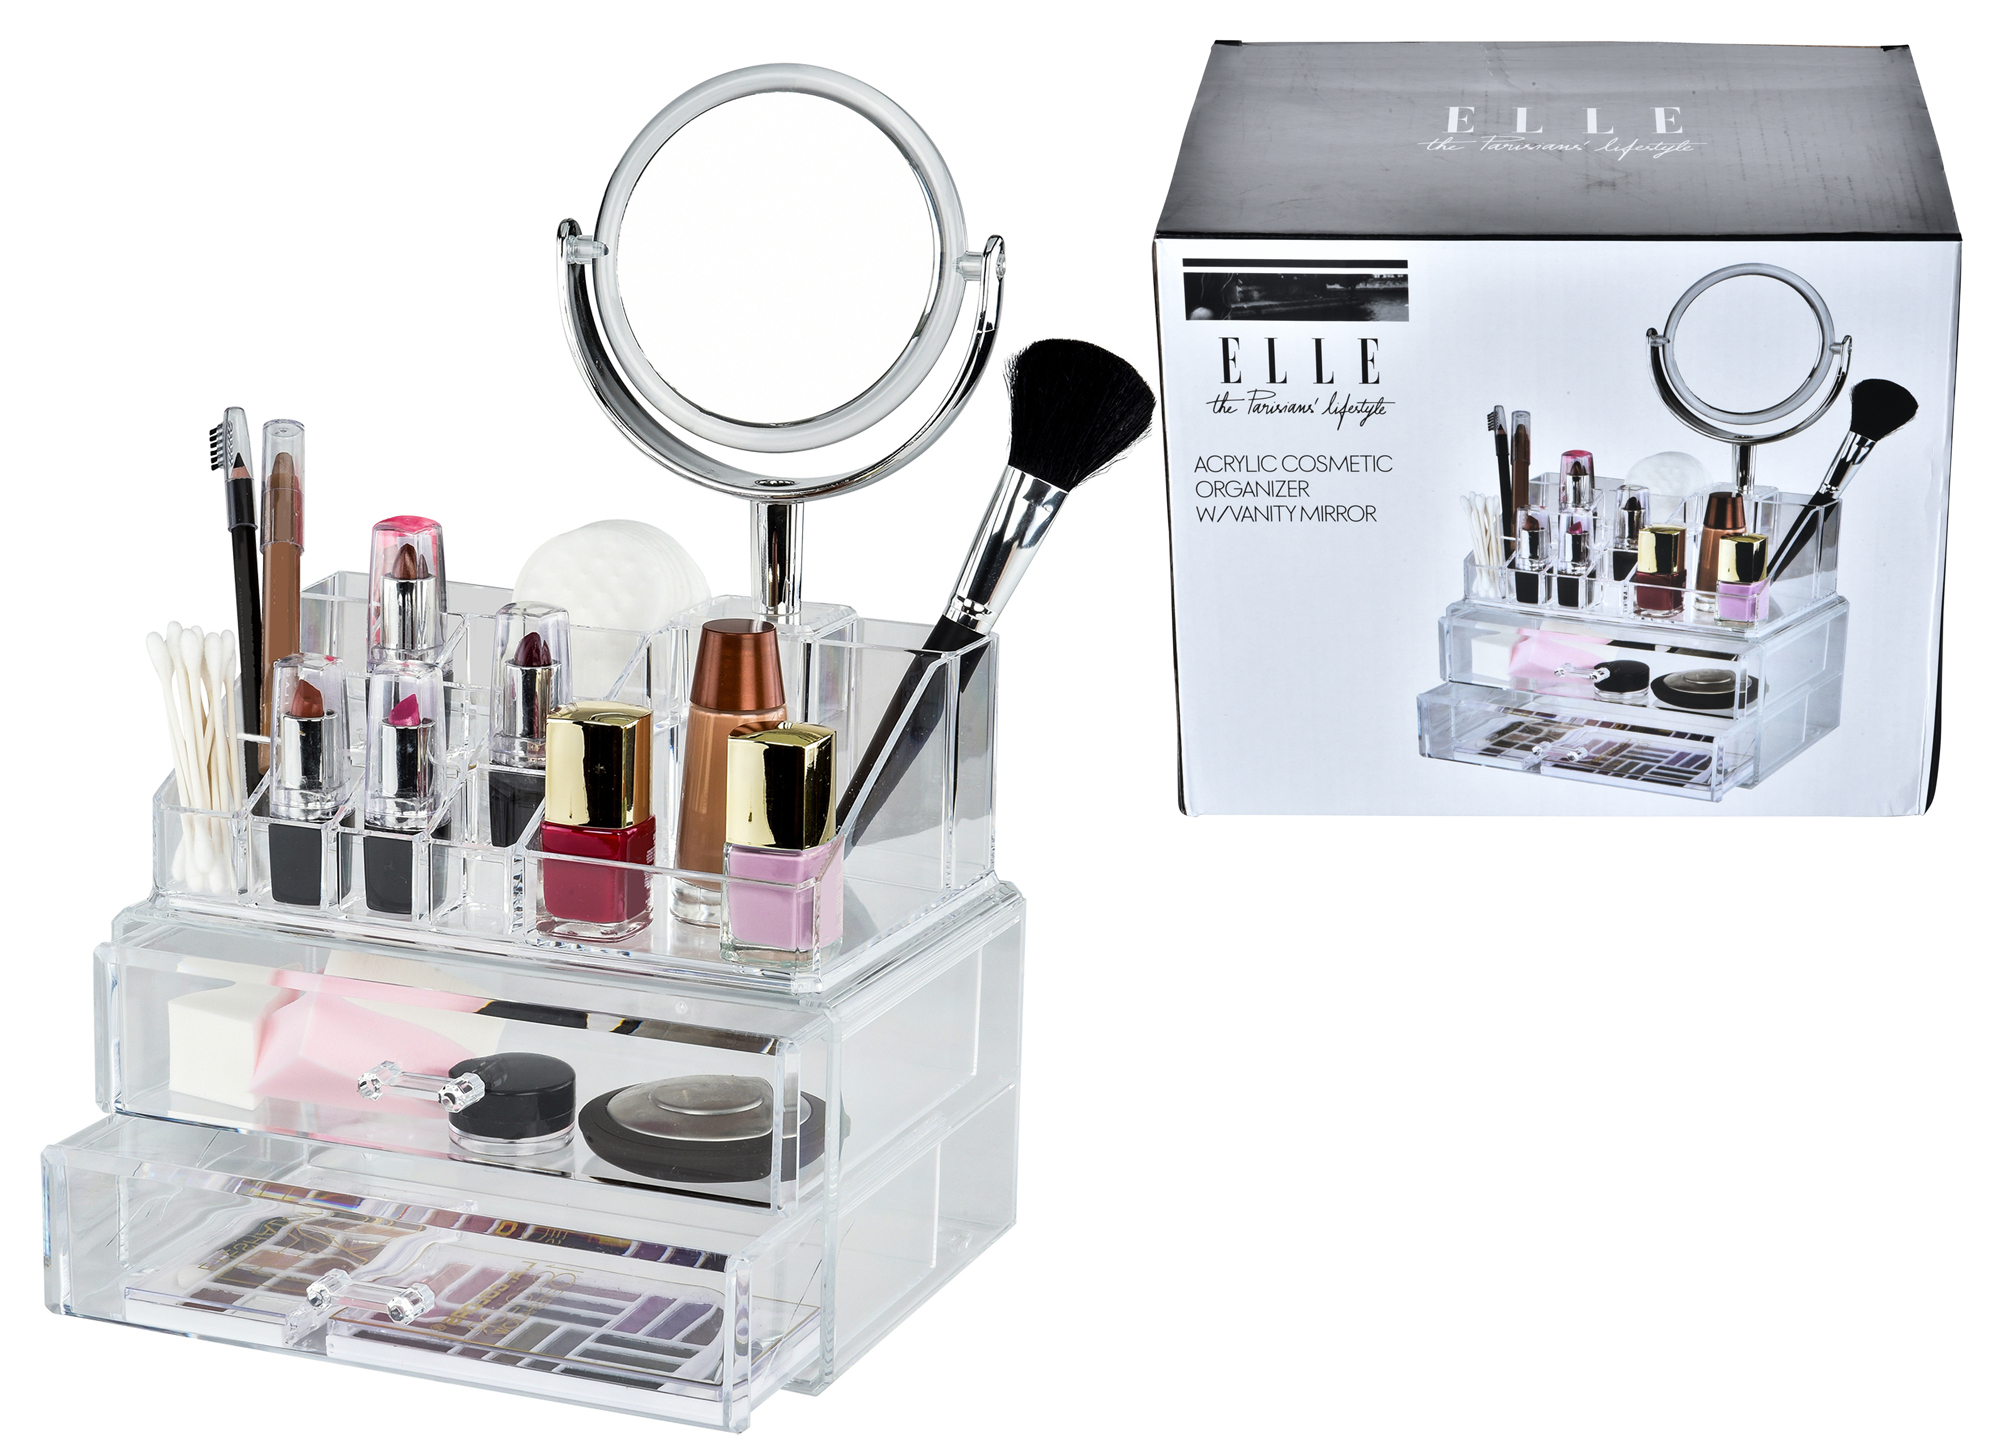 ELLE The Parisians Lifestyle Collection Cosmetic Makeup Organizers w/ Pull Out Drawers & Vanity Mirr